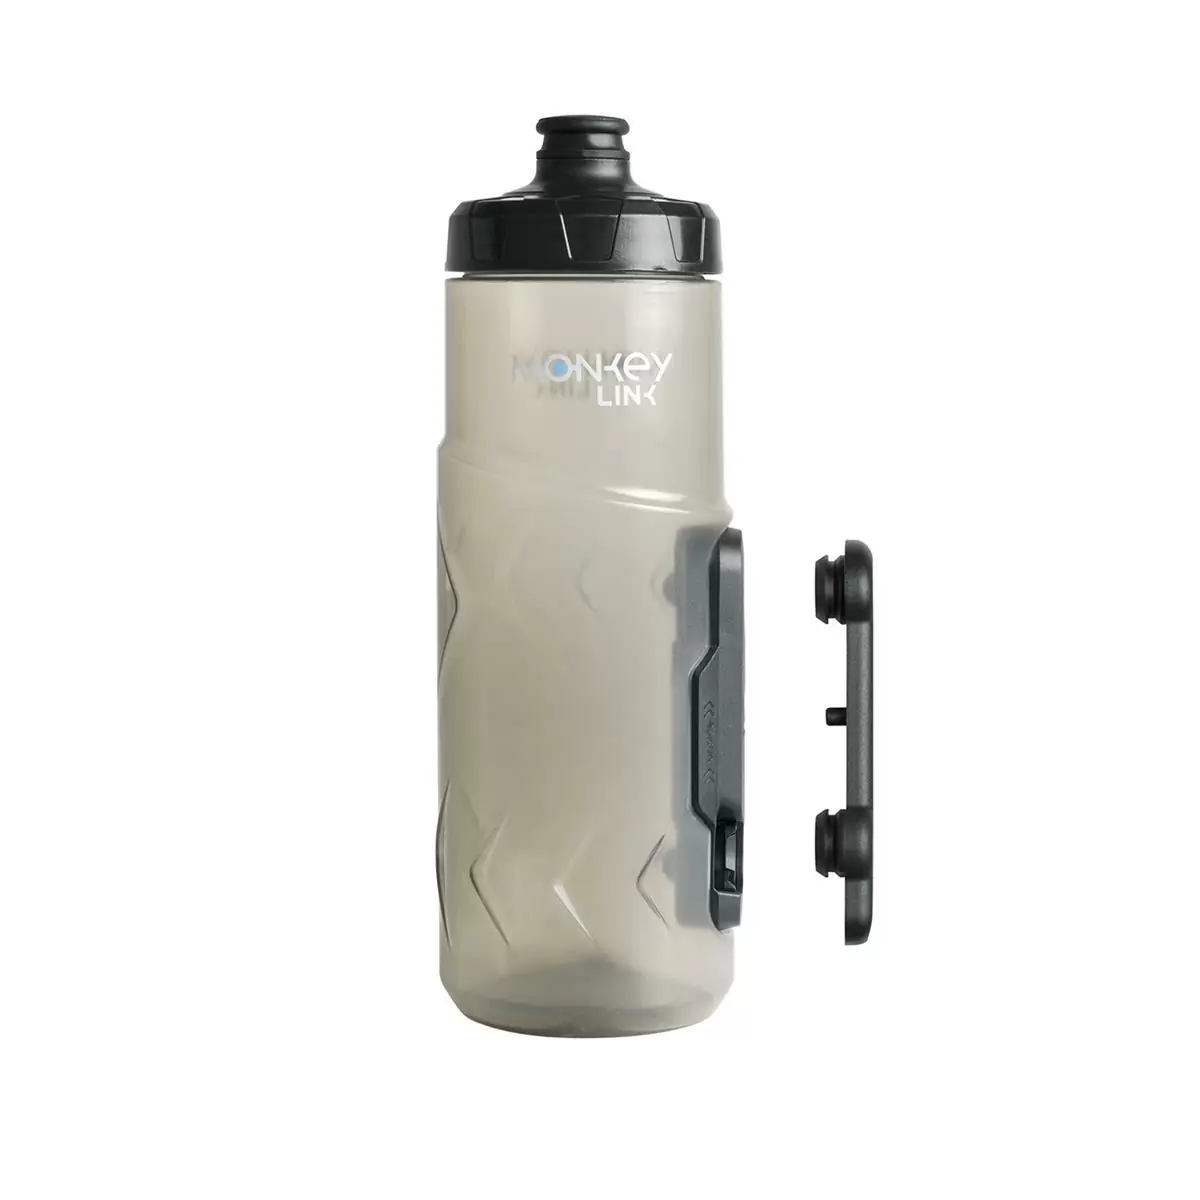 Waterbottle 600ml transparent bottle holder with magnetic attack - image